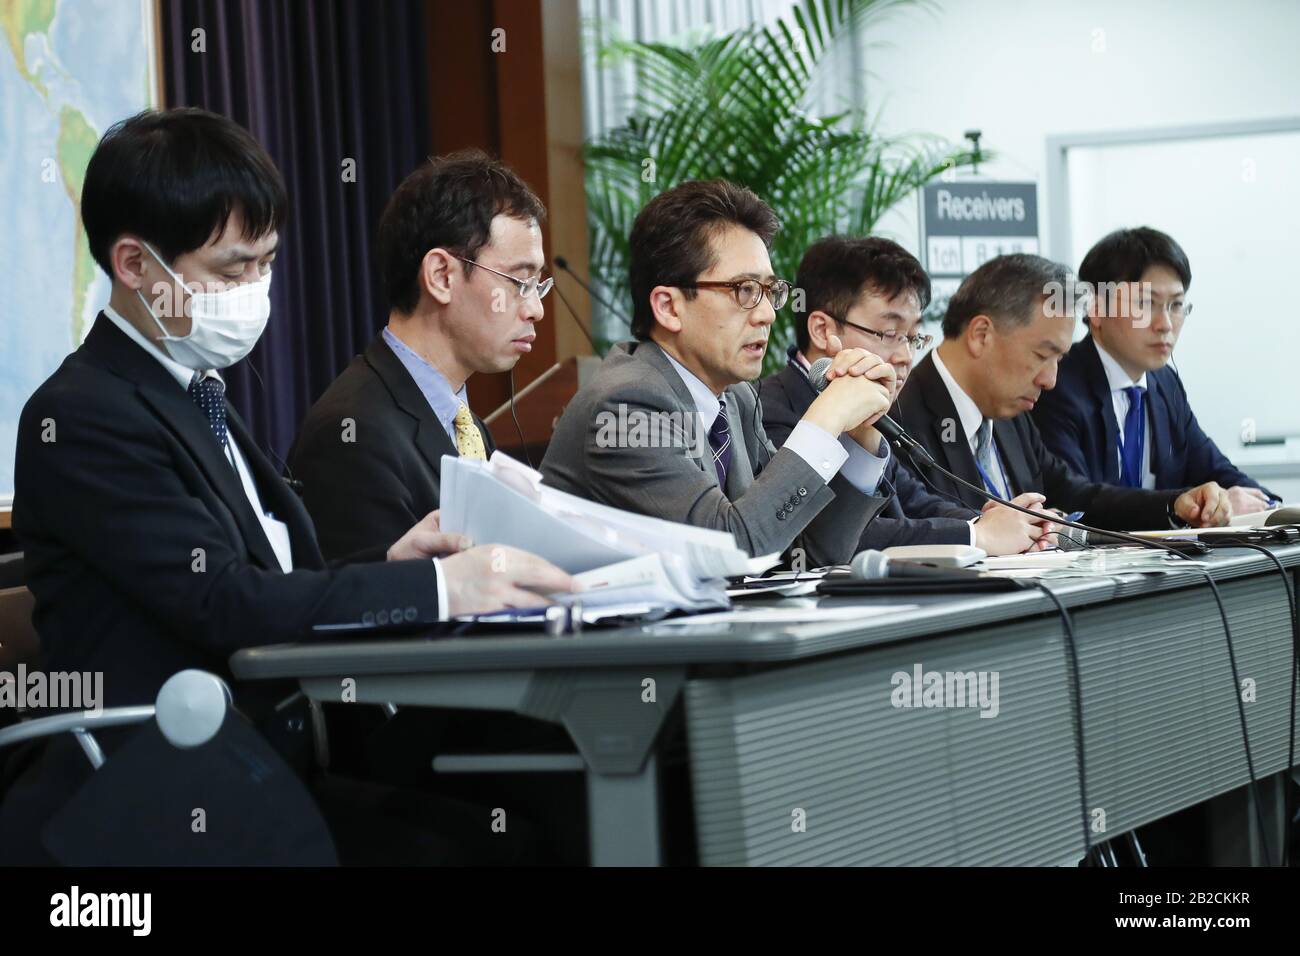 Tokyo, Japan. 2nd Mar, 2020. Yasuyuki Sahara (C) Senior Assistant Minister for Global Health, Minister's Secretariat, Ministry of Health, Labor and Welfare attends a news conference at the Ministry of Foreign Affairs of Japan (MOFA). Sahara spoke about the basic policies to prevent and control of the novel coronavirus outbreak in Japan. Credit: Rodrigo Reyes Marin/ZUMA Wire/Alamy Live News Credit: ZUMA Press, Inc./Alamy Live News Stock Photo